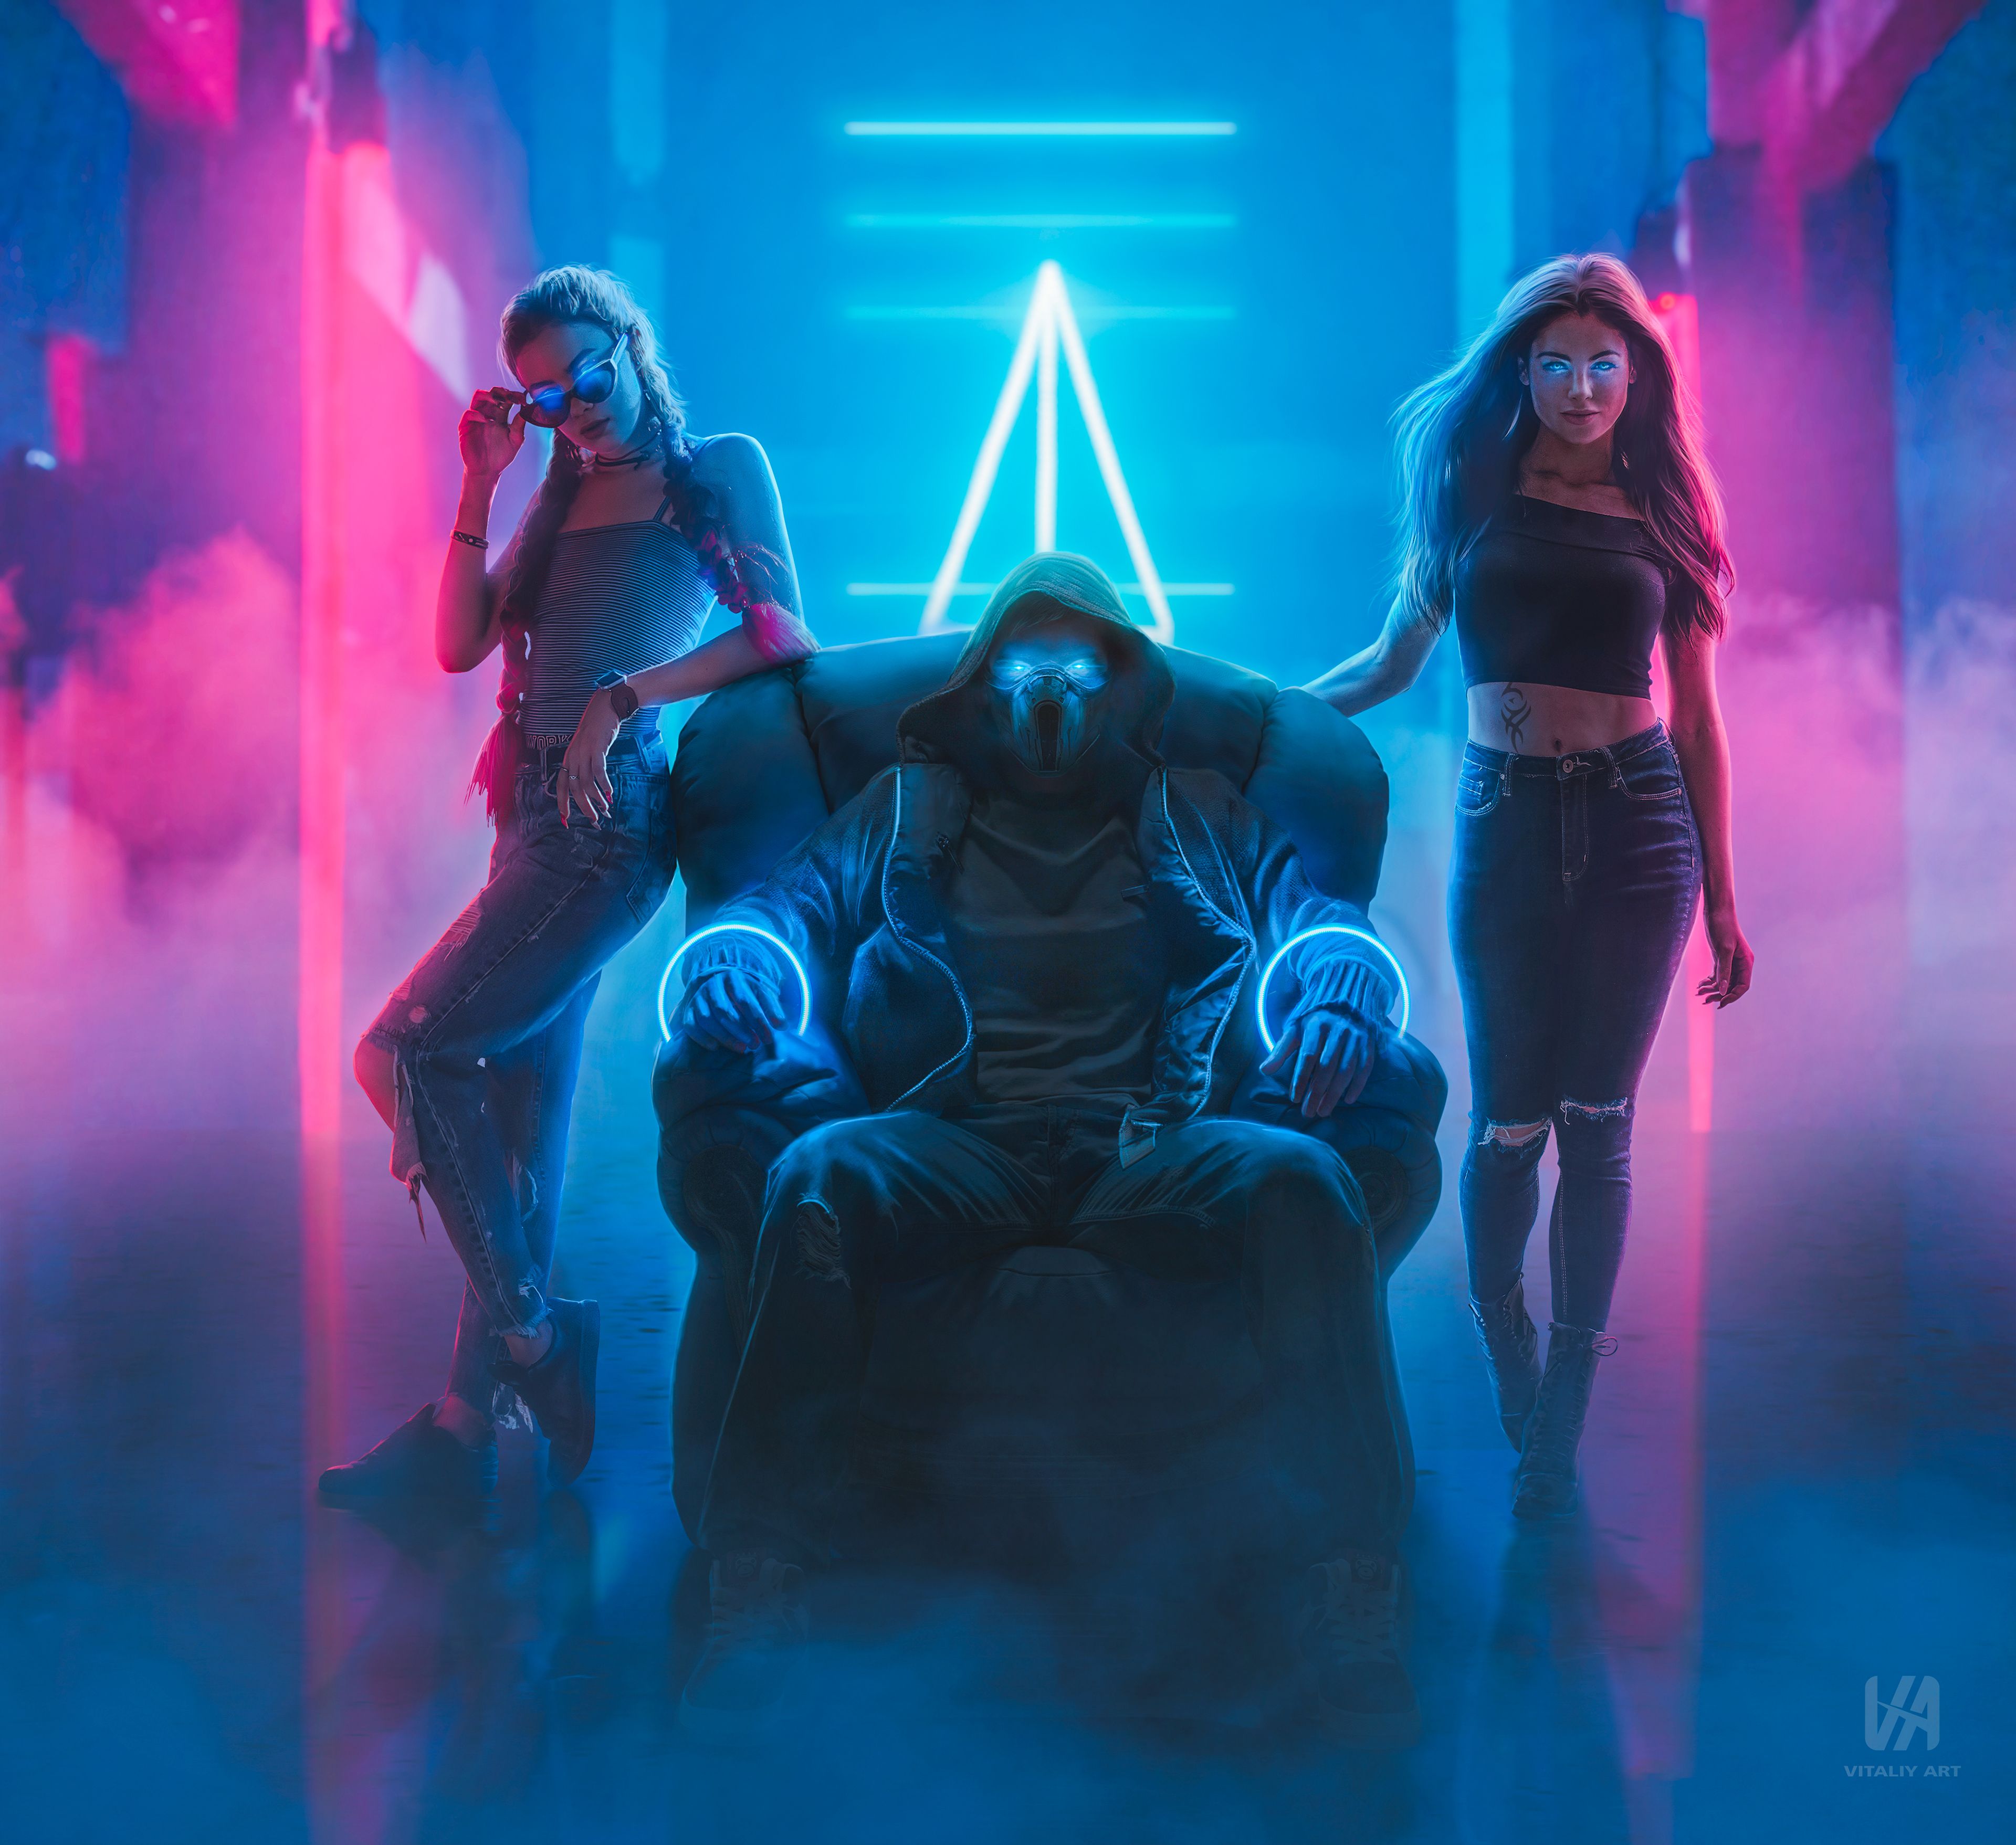 Wallpaper Cyberpunk, Night club, Neon, Girls, 4K, Photography / Editor's Picks,. Wallpaper for iPhone, Android, Mobile and Desktop